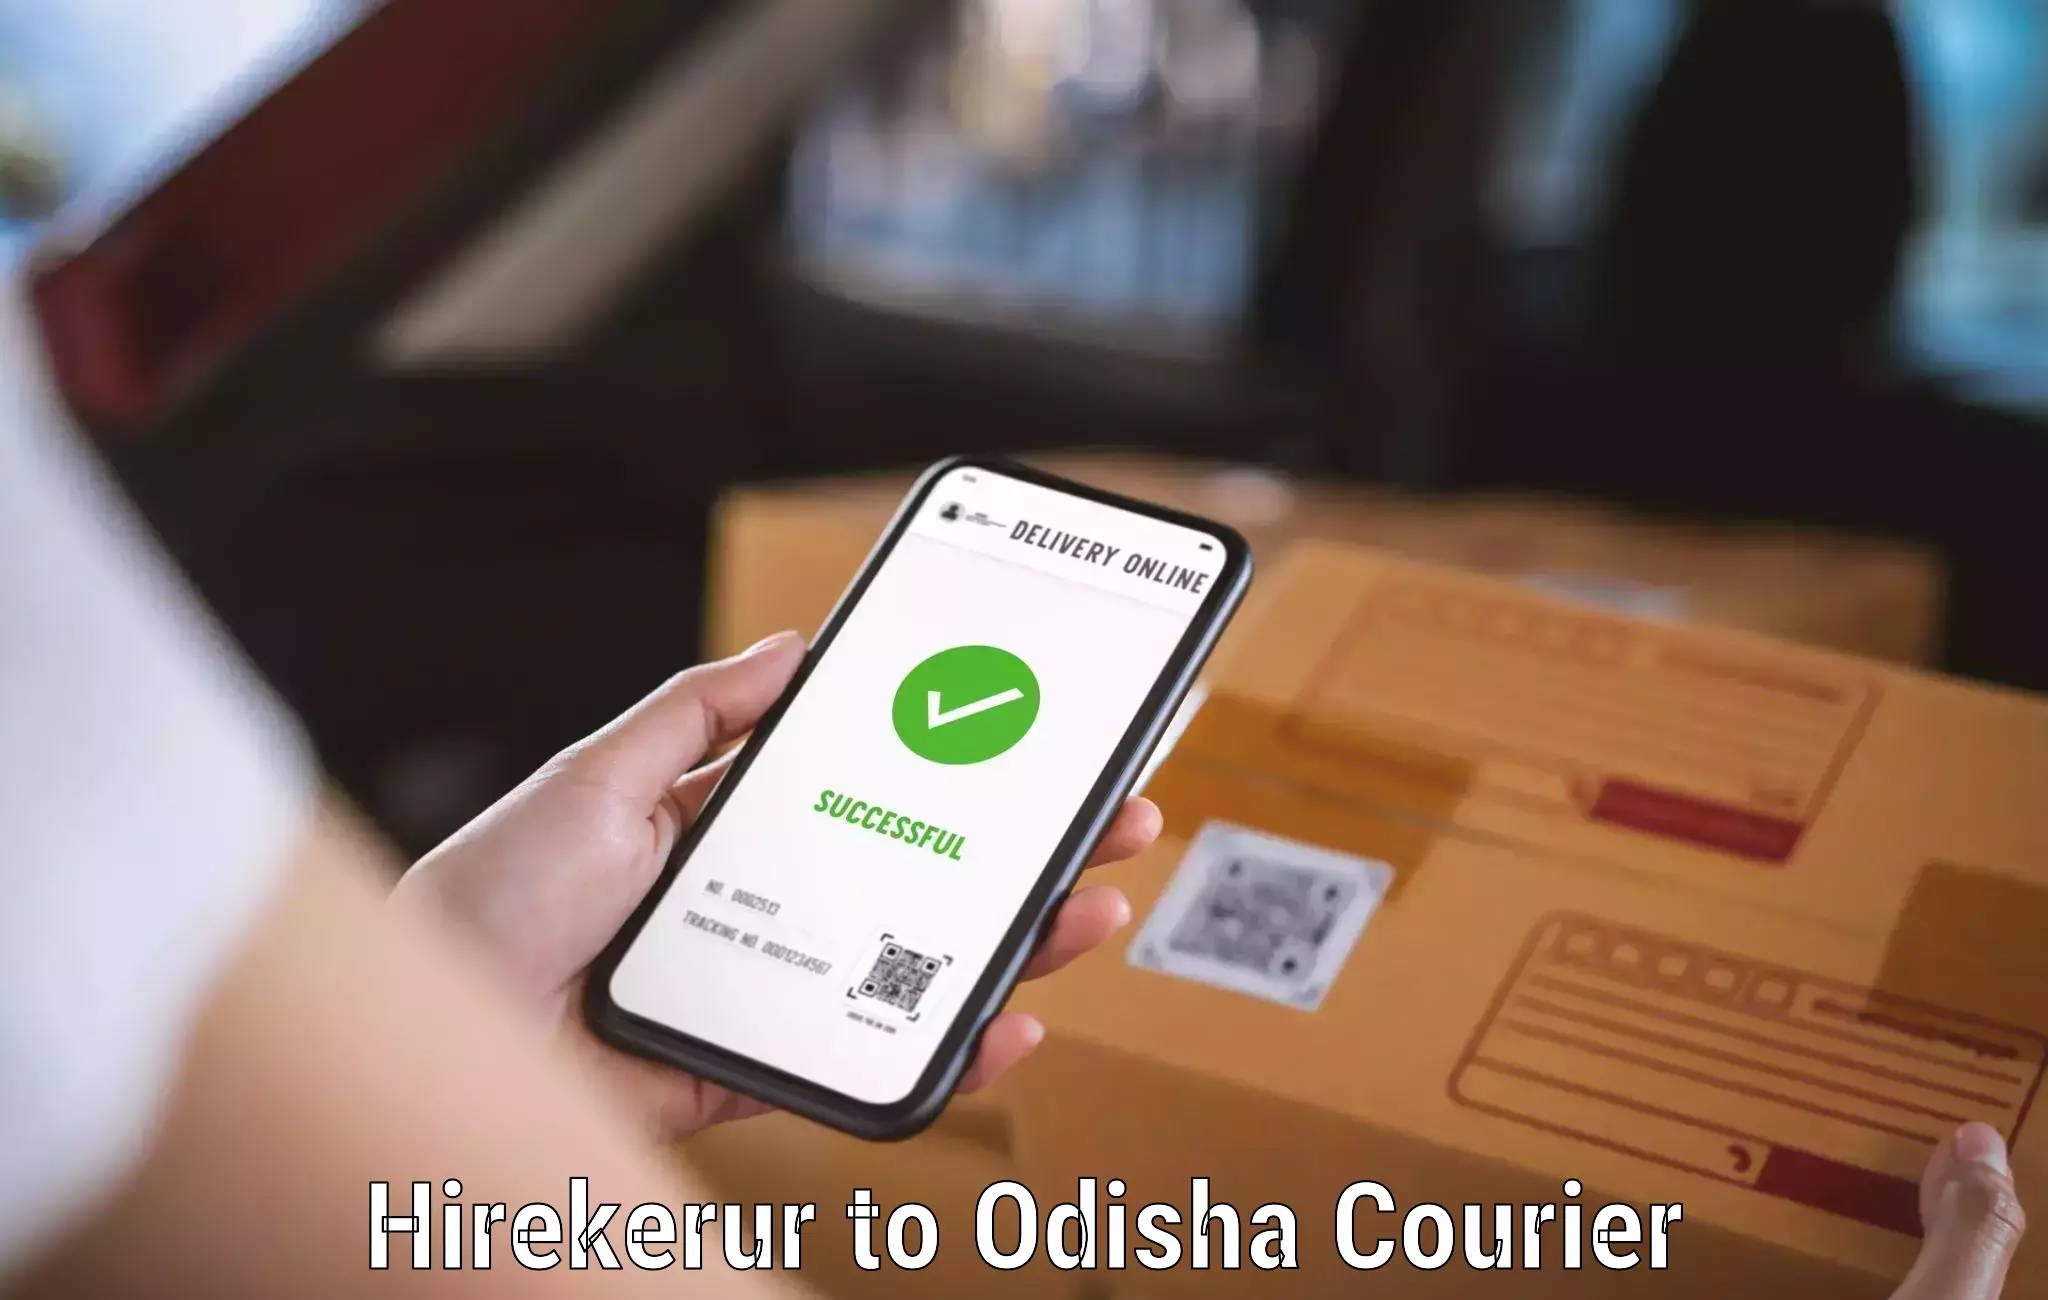 Courier service booking Hirekerur to Jharsuguda